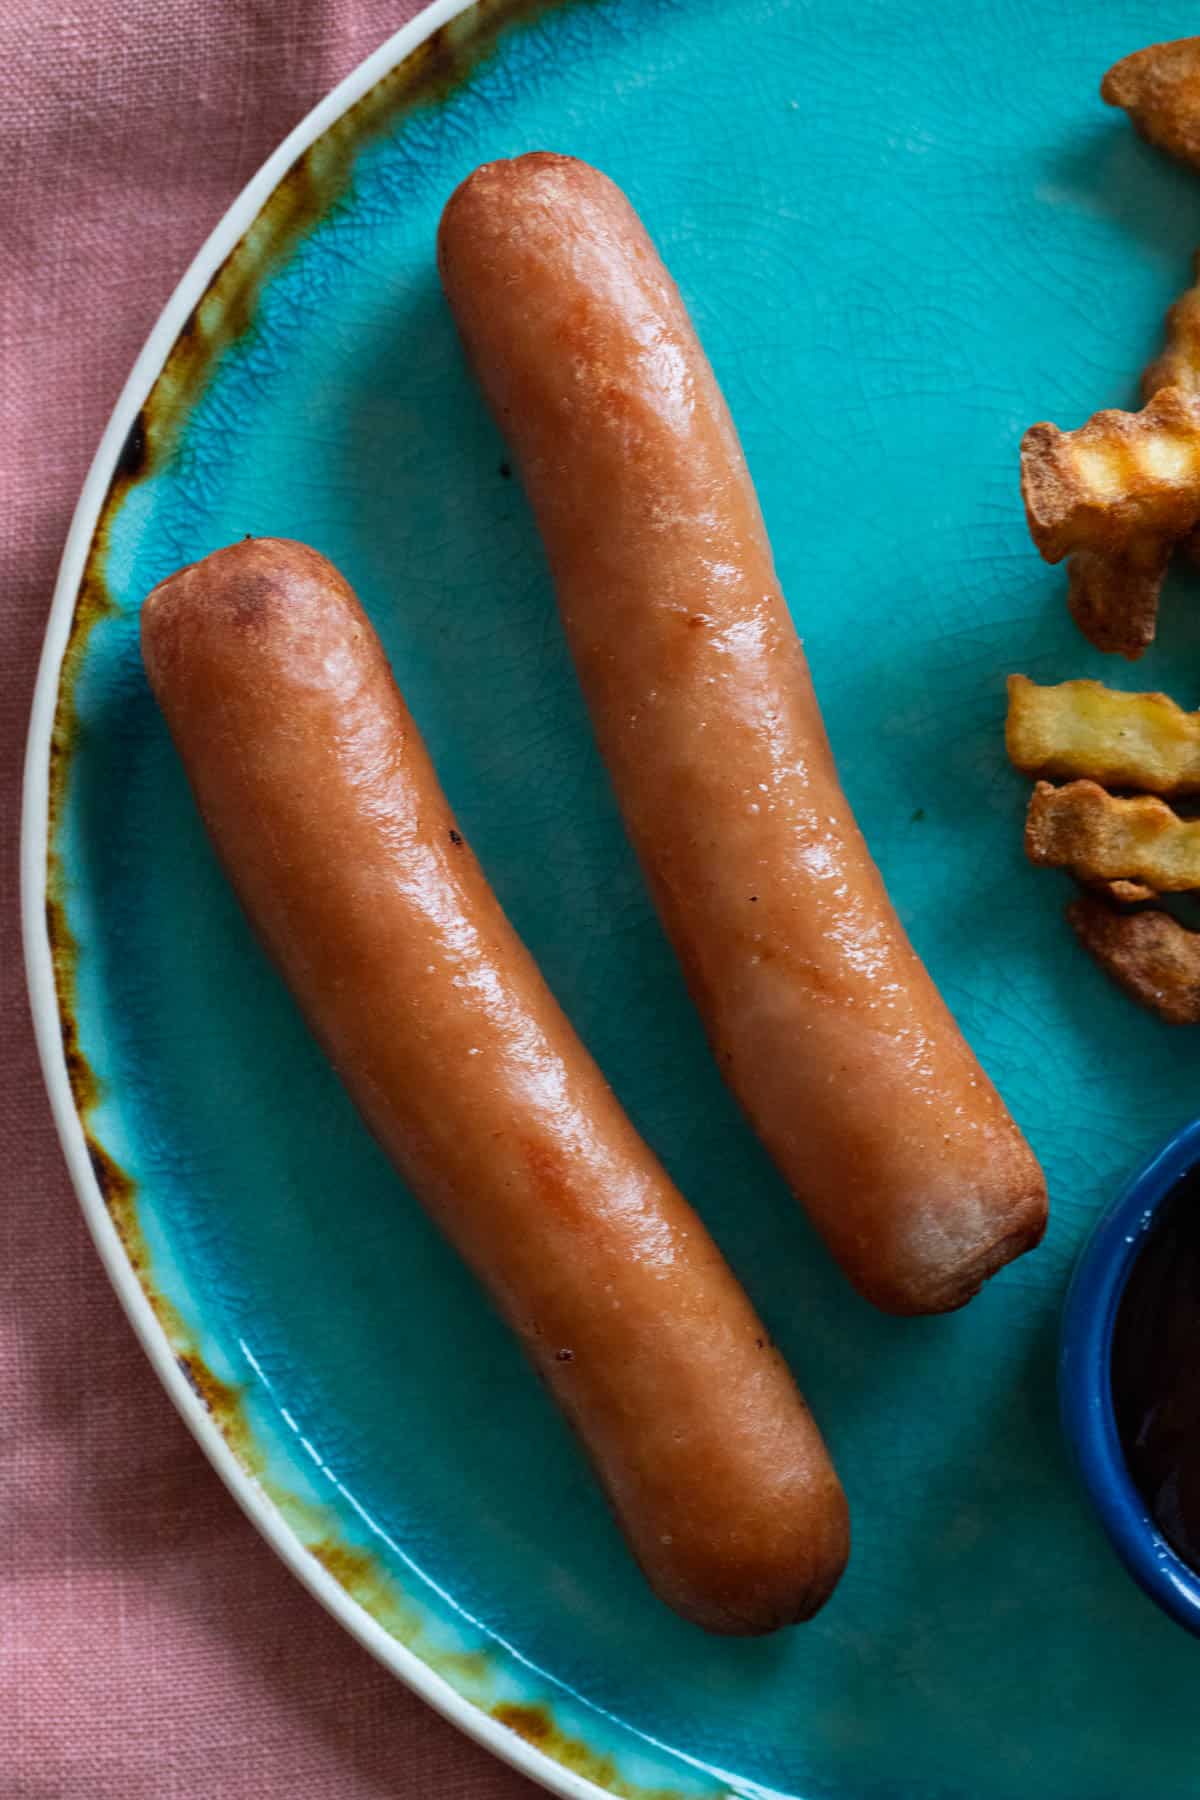 Cooked hot dogs on a blue plate.